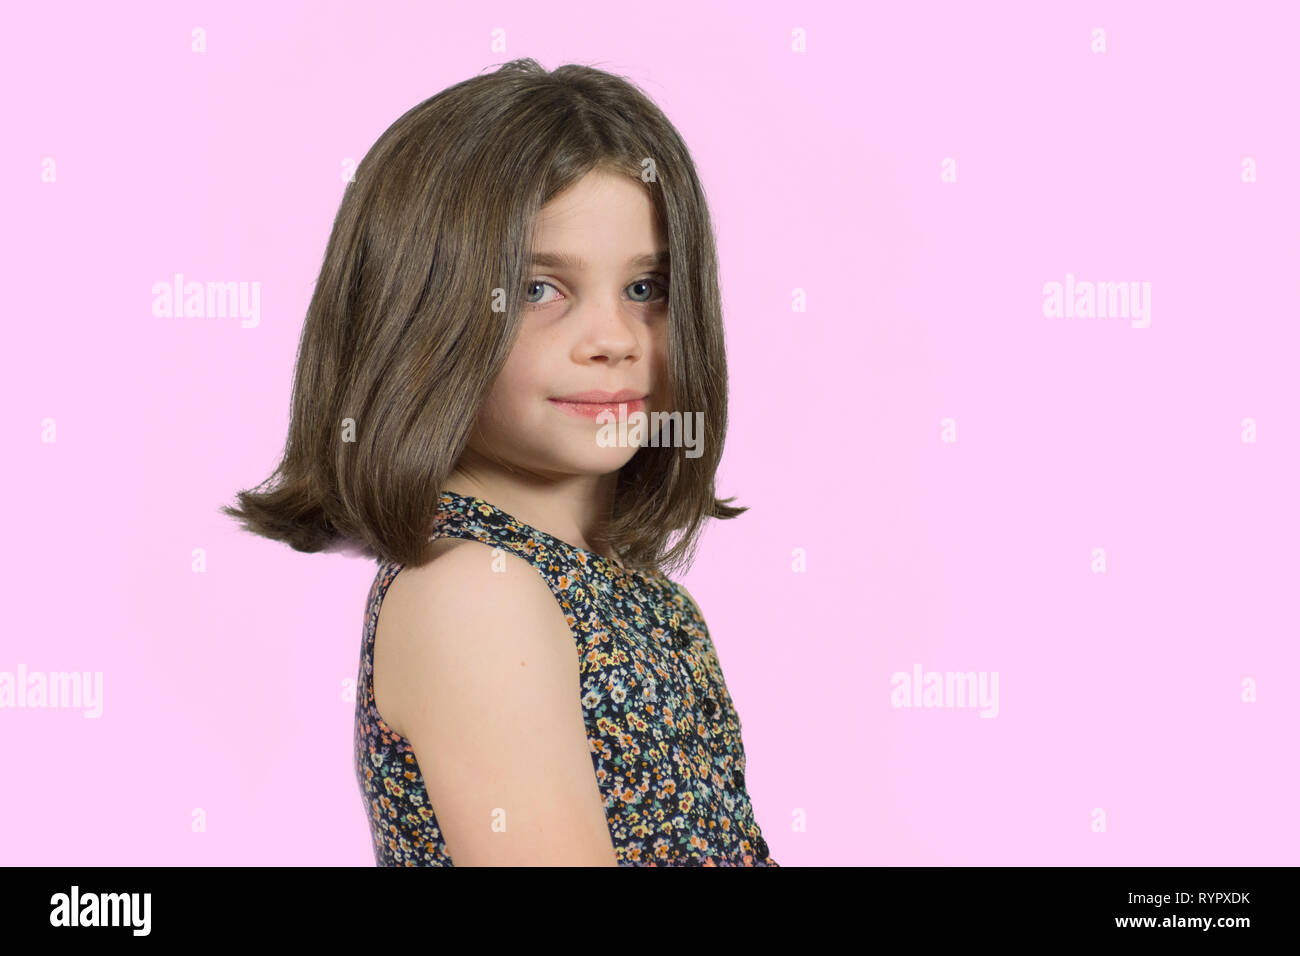 Confident Little Girl With Short Hair With Pink Background